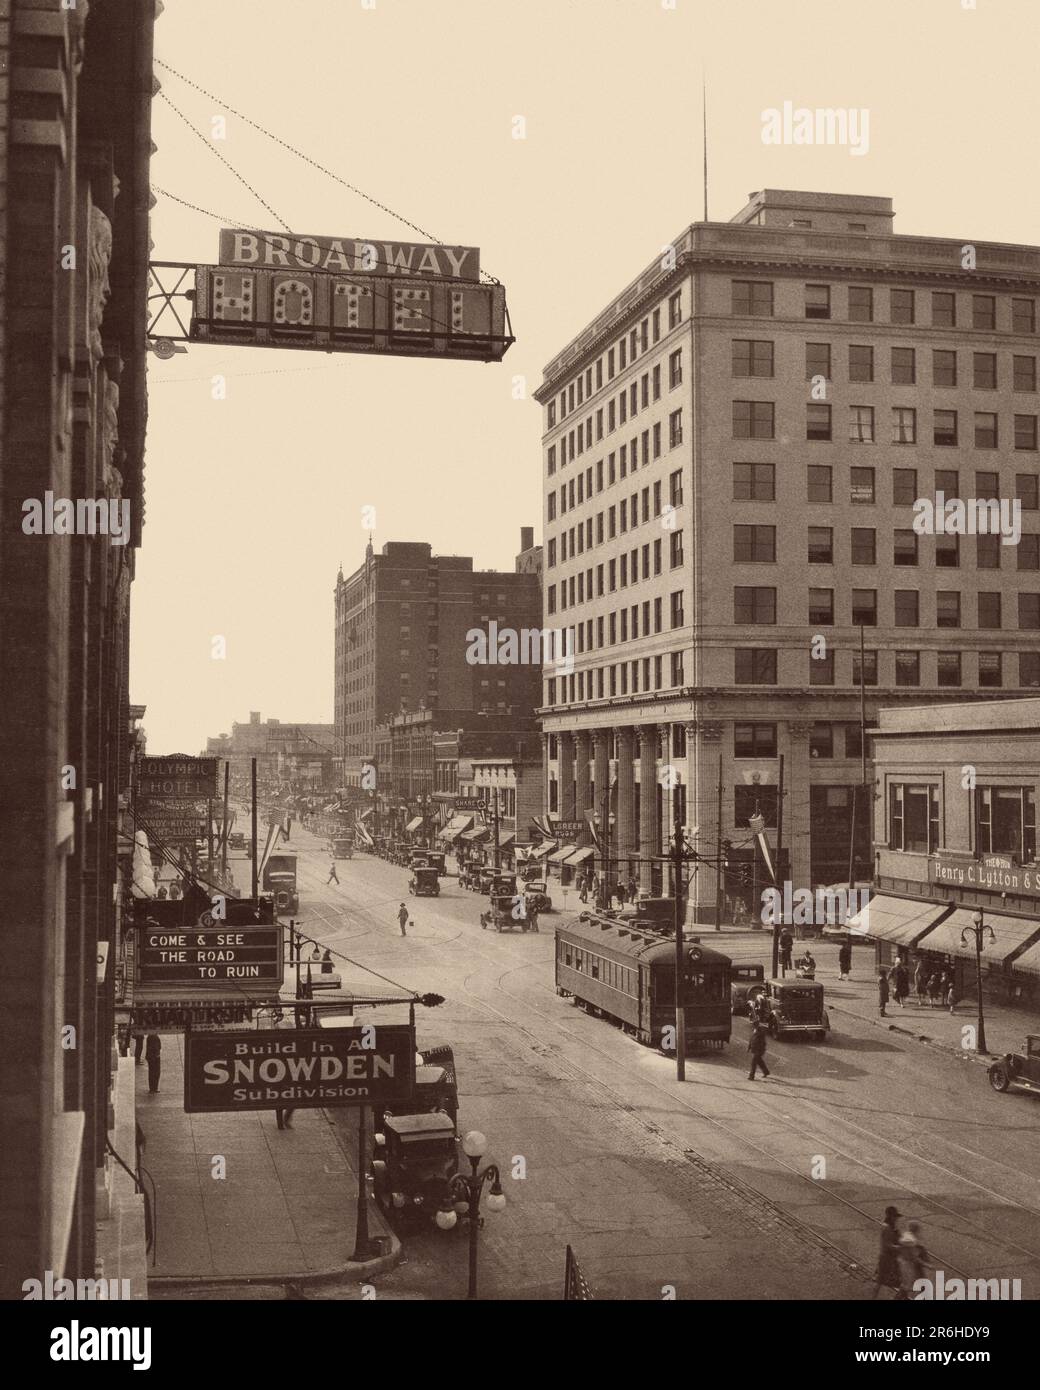 1920s ELEVATED VIEW TROLLEY AT CORNER OF BROADWAY A HOTEL AND A MOVIE THEATER MARQUEE FOR FILM ROAD TO RUIN IN GARY INDIANA USA - q74982 CPC001 HARS AUTOMOBILE CORNER BUILDINGS ENTERTAINMENT TRANSPORTATION B&W MOVIES NORTH AMERICA SHOPPER NORTH AMERICAN SHOPPERS DREAMS STRUCTURE HIGH ANGLE CINEMAS PROPERTY AUTOS IN OF THE STORES TROLLEY INDIANA REAL ESTATE STRUCTURES AUTOMOBILES ELEVATED VEHICLES EDIFICE MOTION PICTURE MOTION PICTURES BROADWAY COMMERCE GROWTH HOTELS BLACK AND WHITE BUSINESSES MIDWEST MIDWESTERN OLD FASHIONED Stock Photo